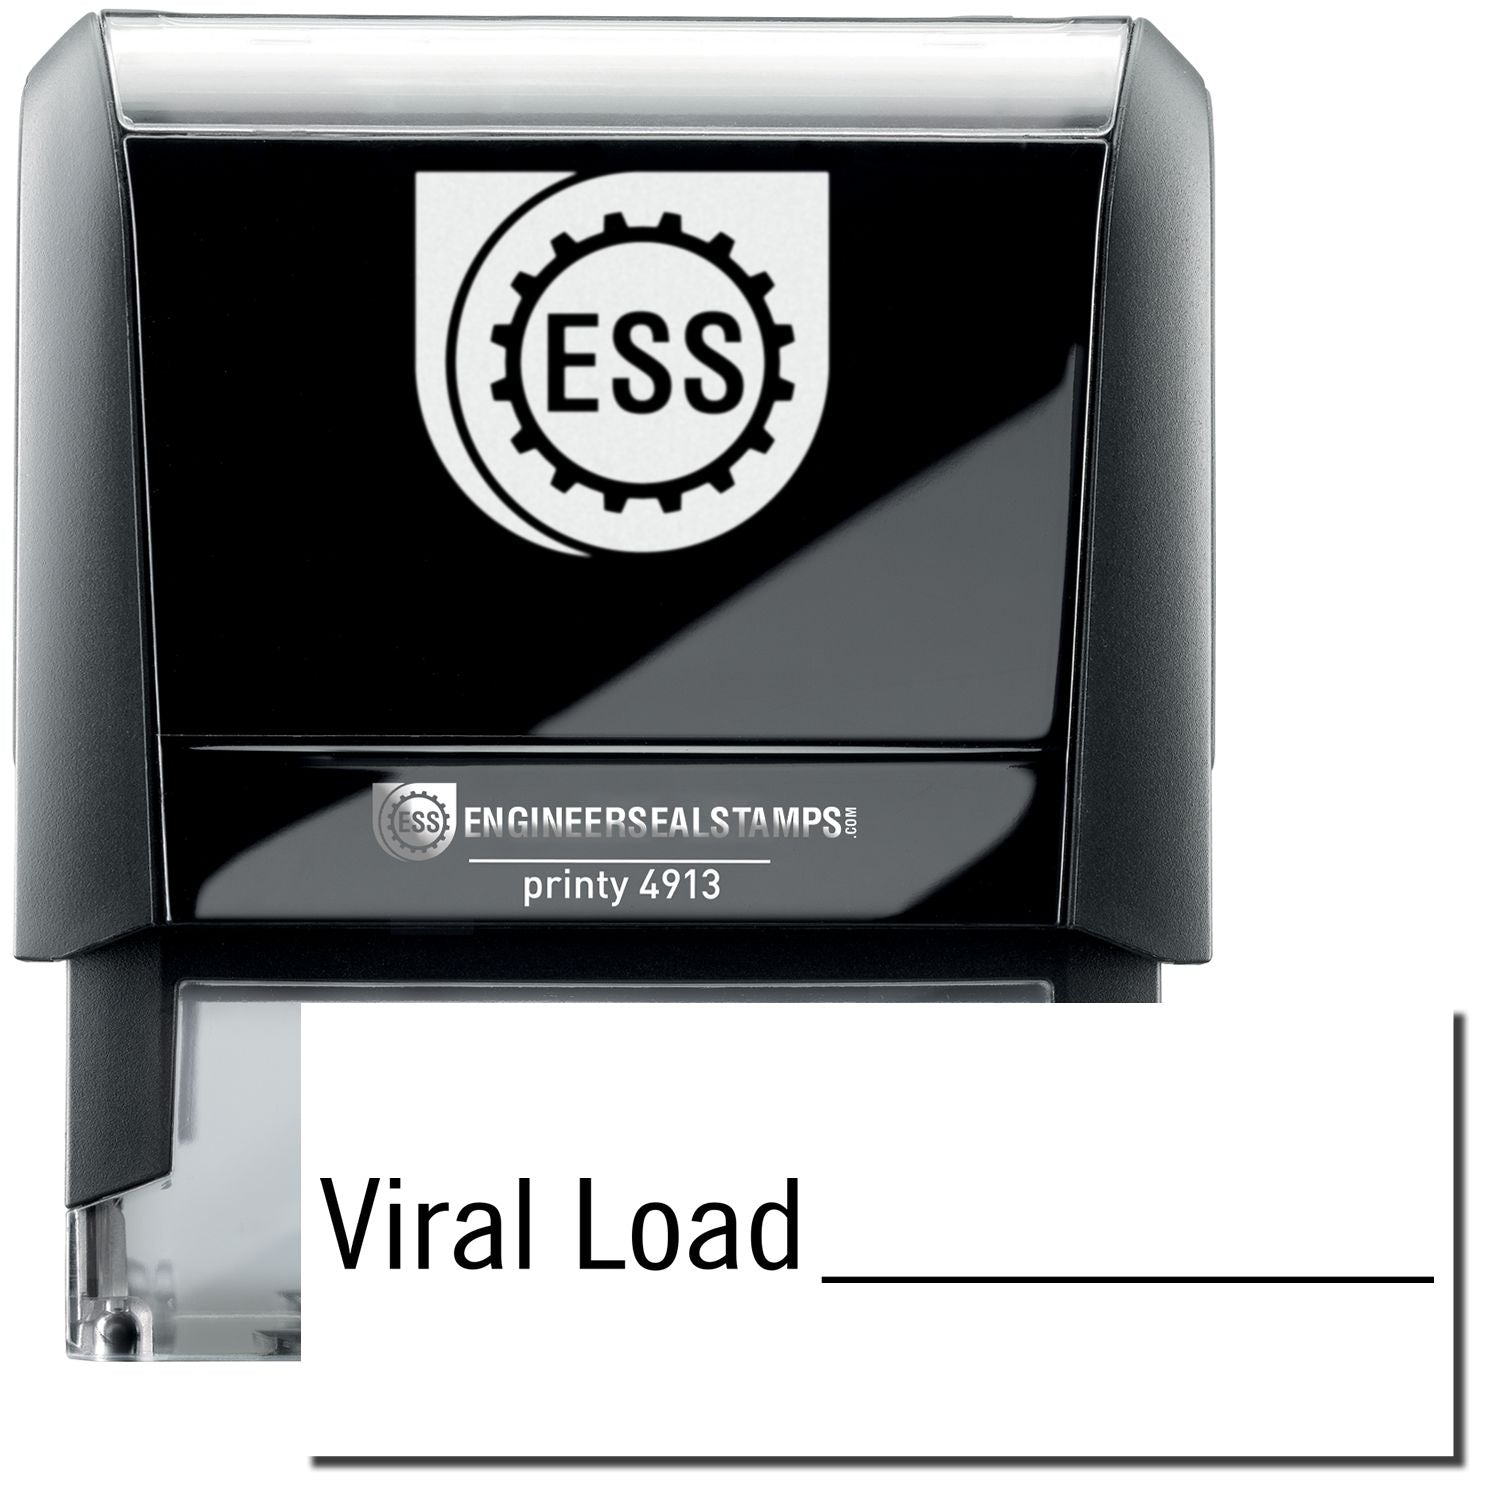 A self-inking stamp with a stamped image showing how the text "Viral Load" in a large font and with a line where workers can jot down the right information is displayed by it after stamping.